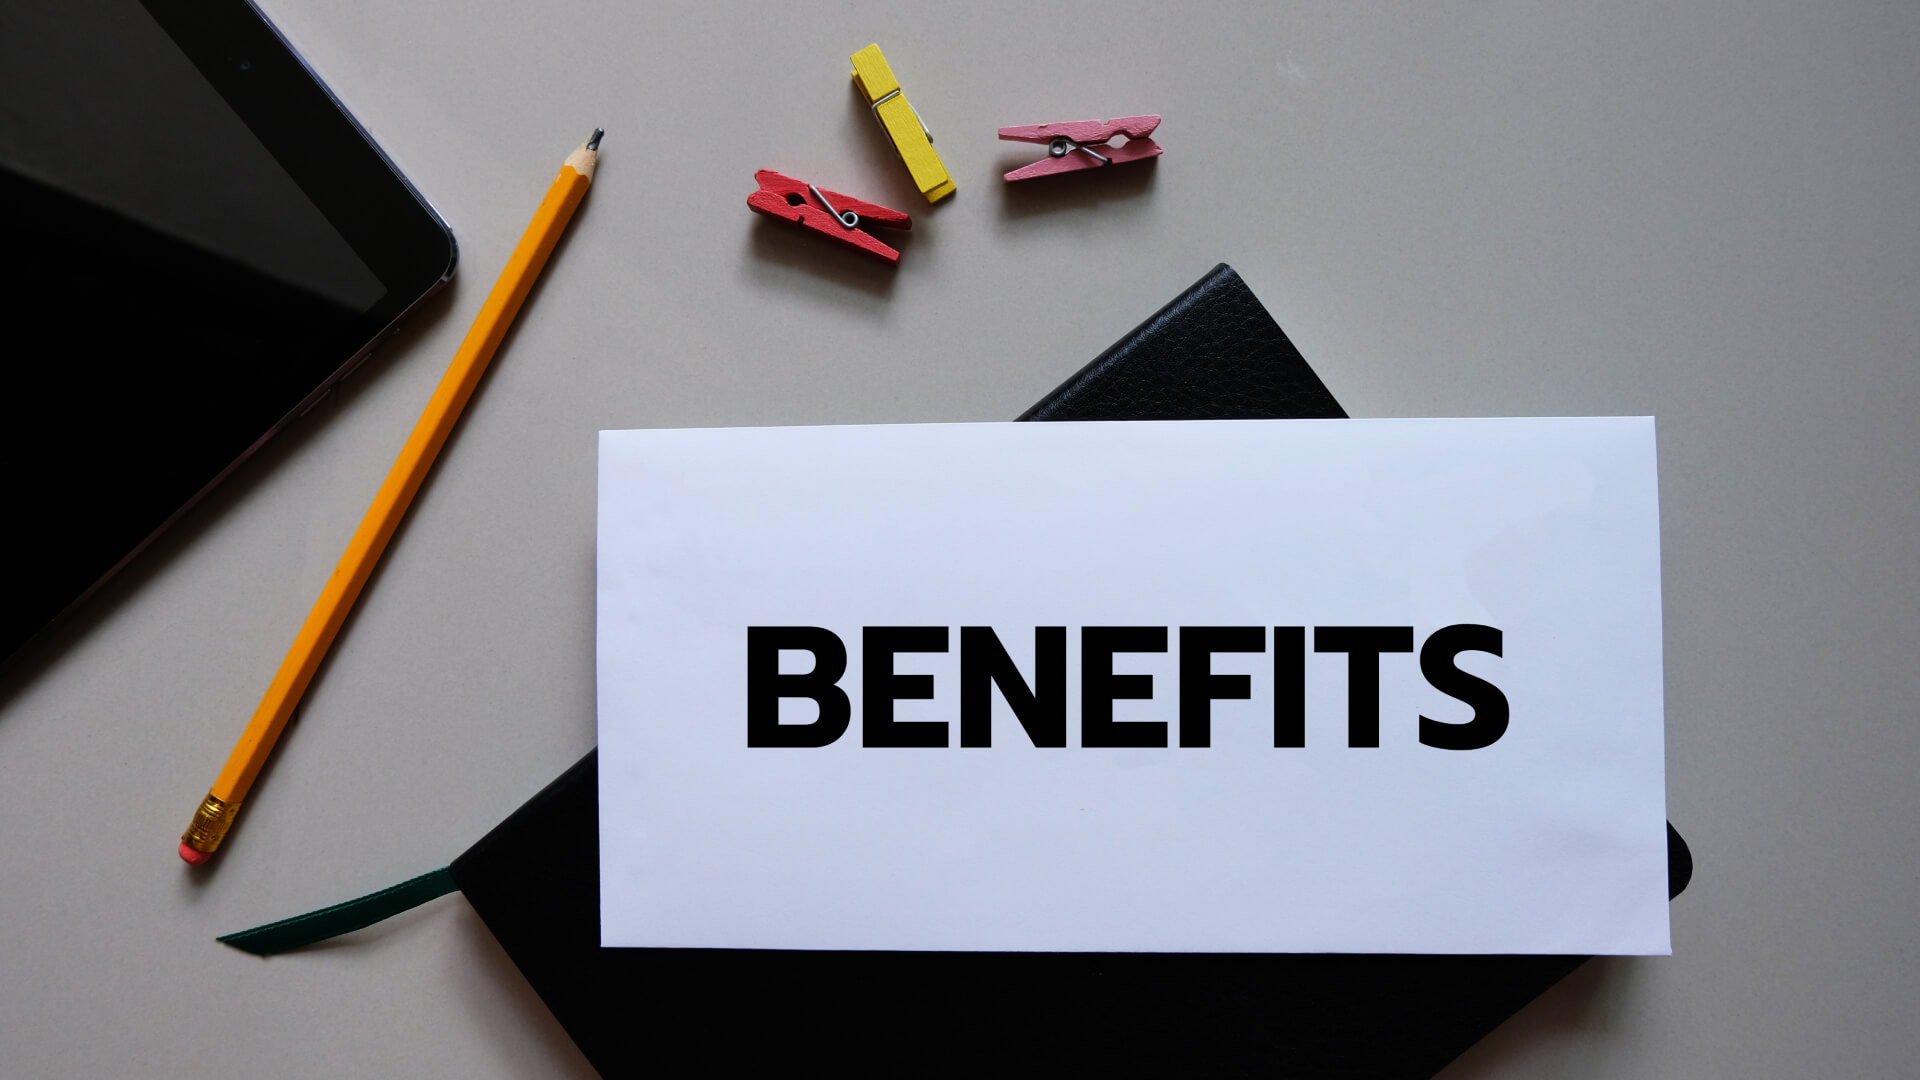 The word 'BENEFITS' prominently displayed on a piece of paper, symbolizing the advantages of using electronic medical records. Surrounding items like a digital tablet and notebook subtly underscore the integration of technology in managing health records efficiently.